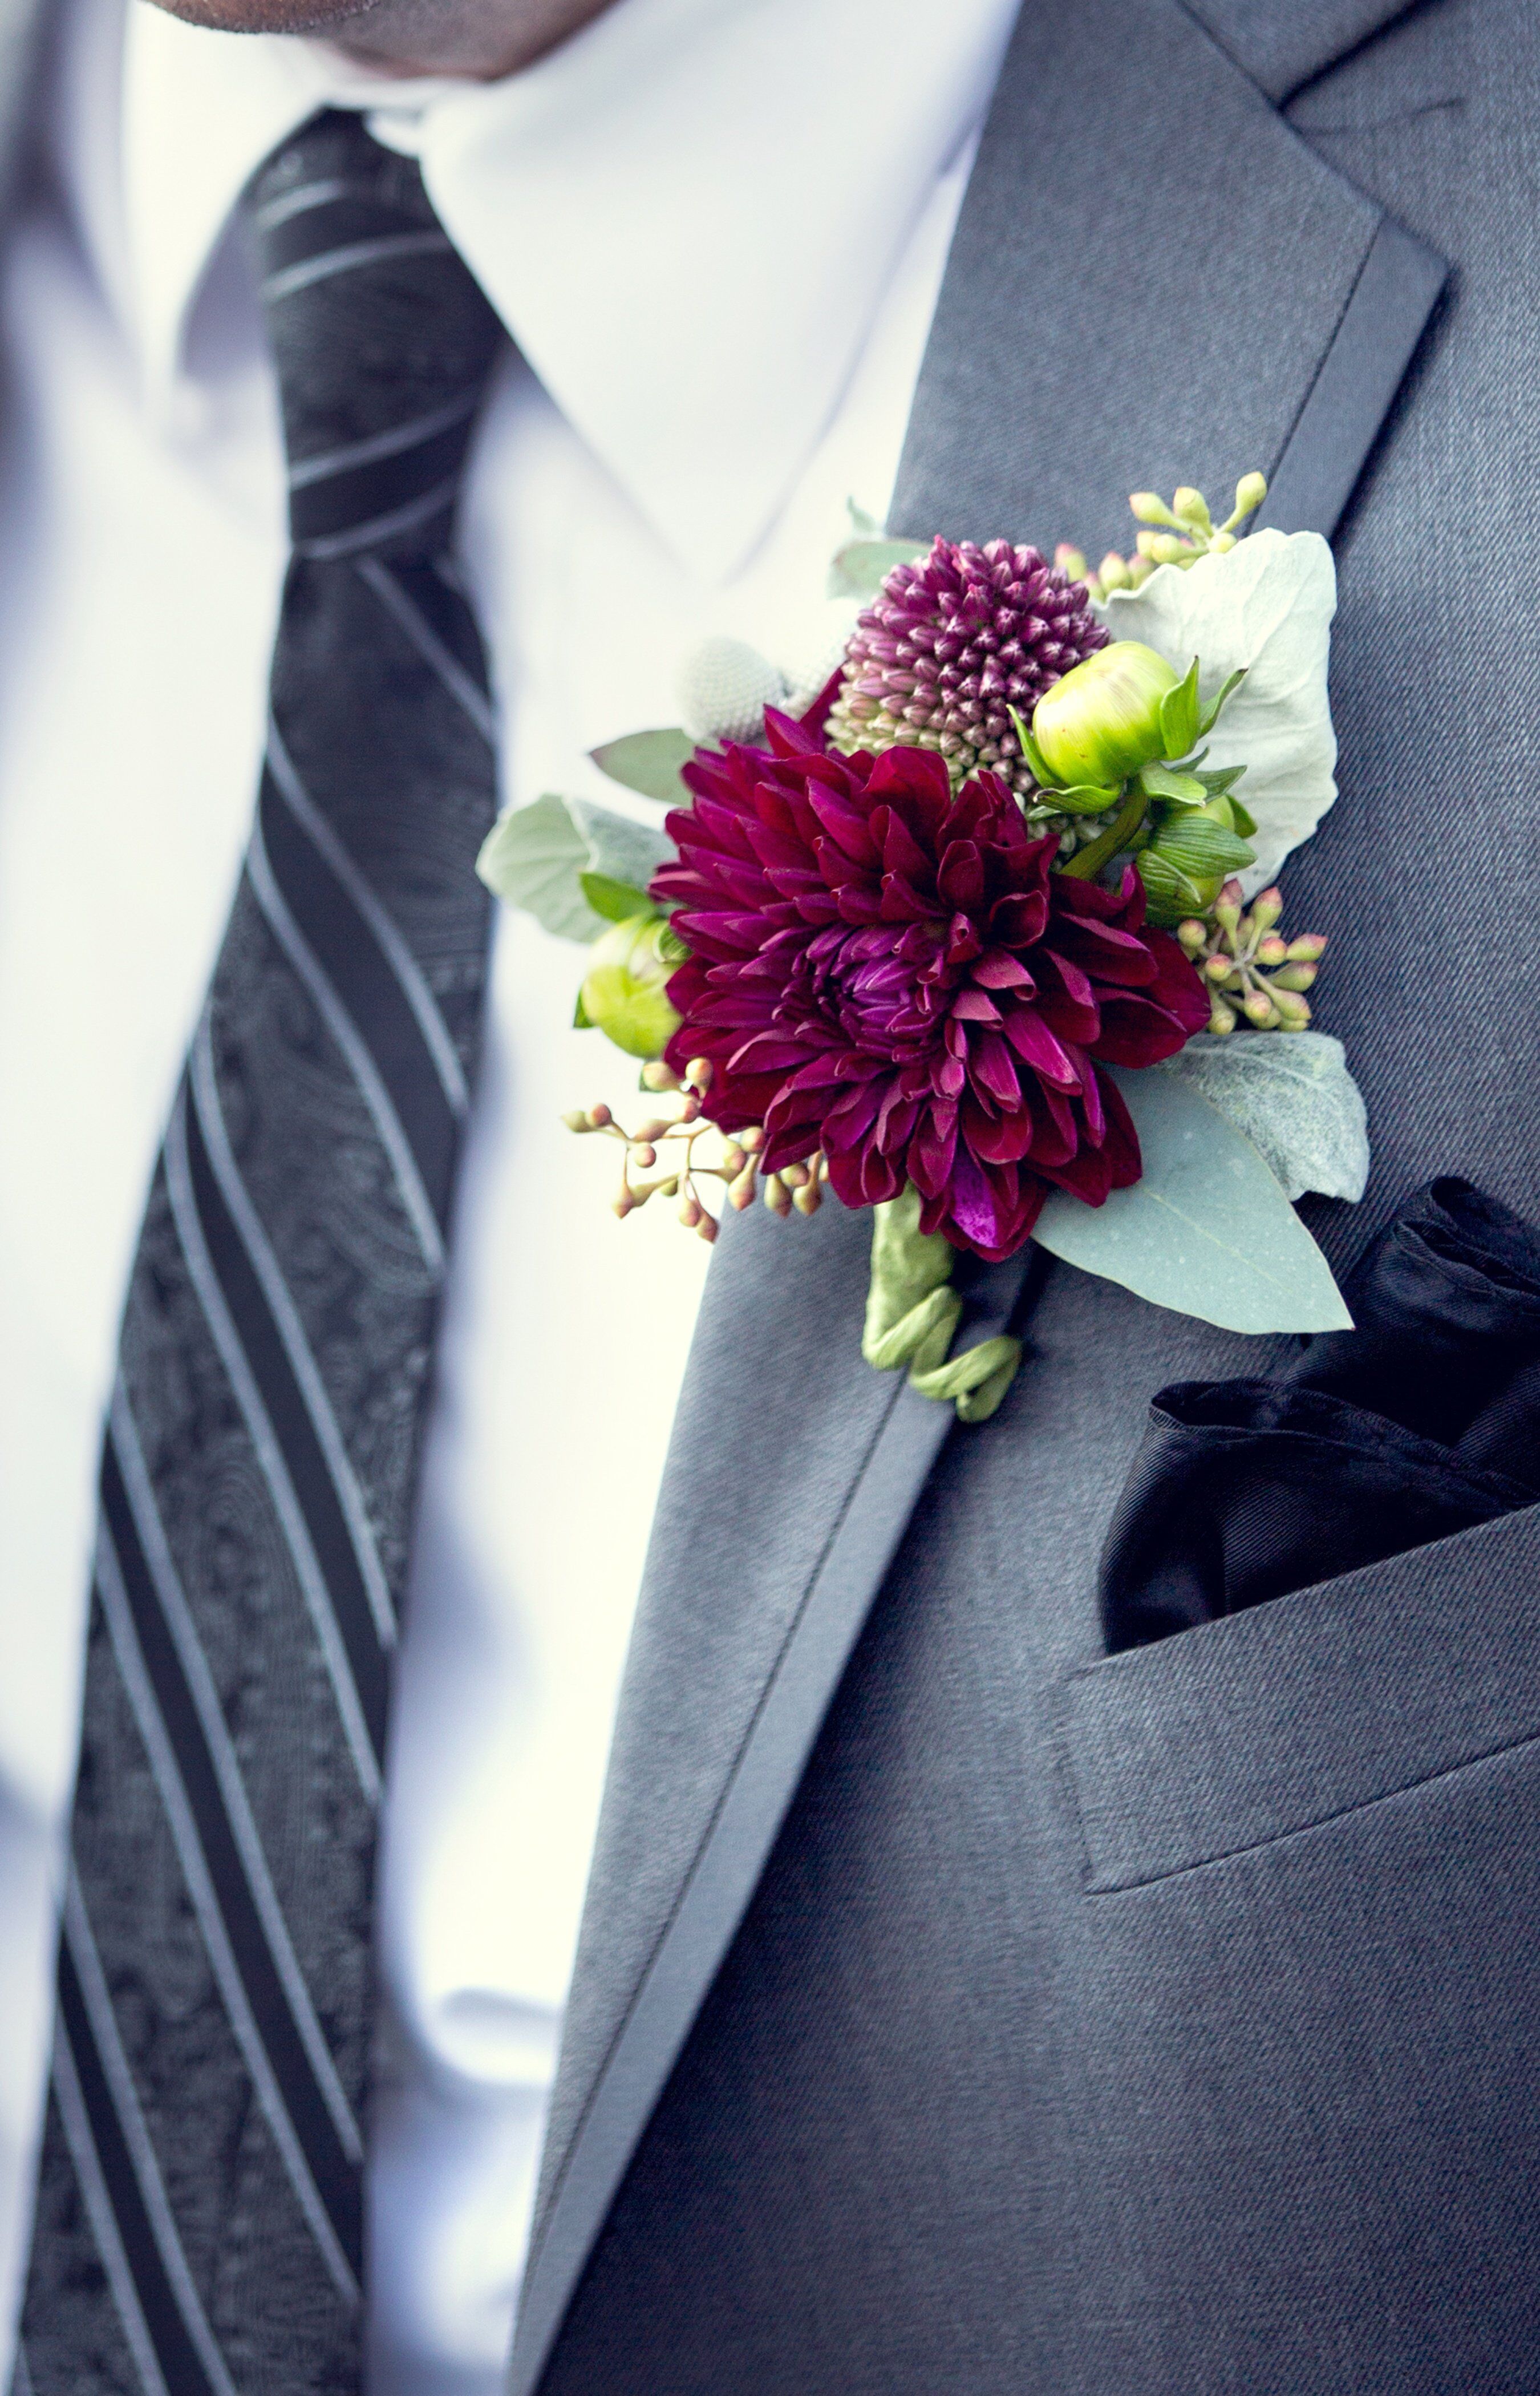 burgundy boutonniere dahlia corsage bouquet bride mother homecoming flowers theknot assorted nuts favors bouquets fall flower bridal silver blush